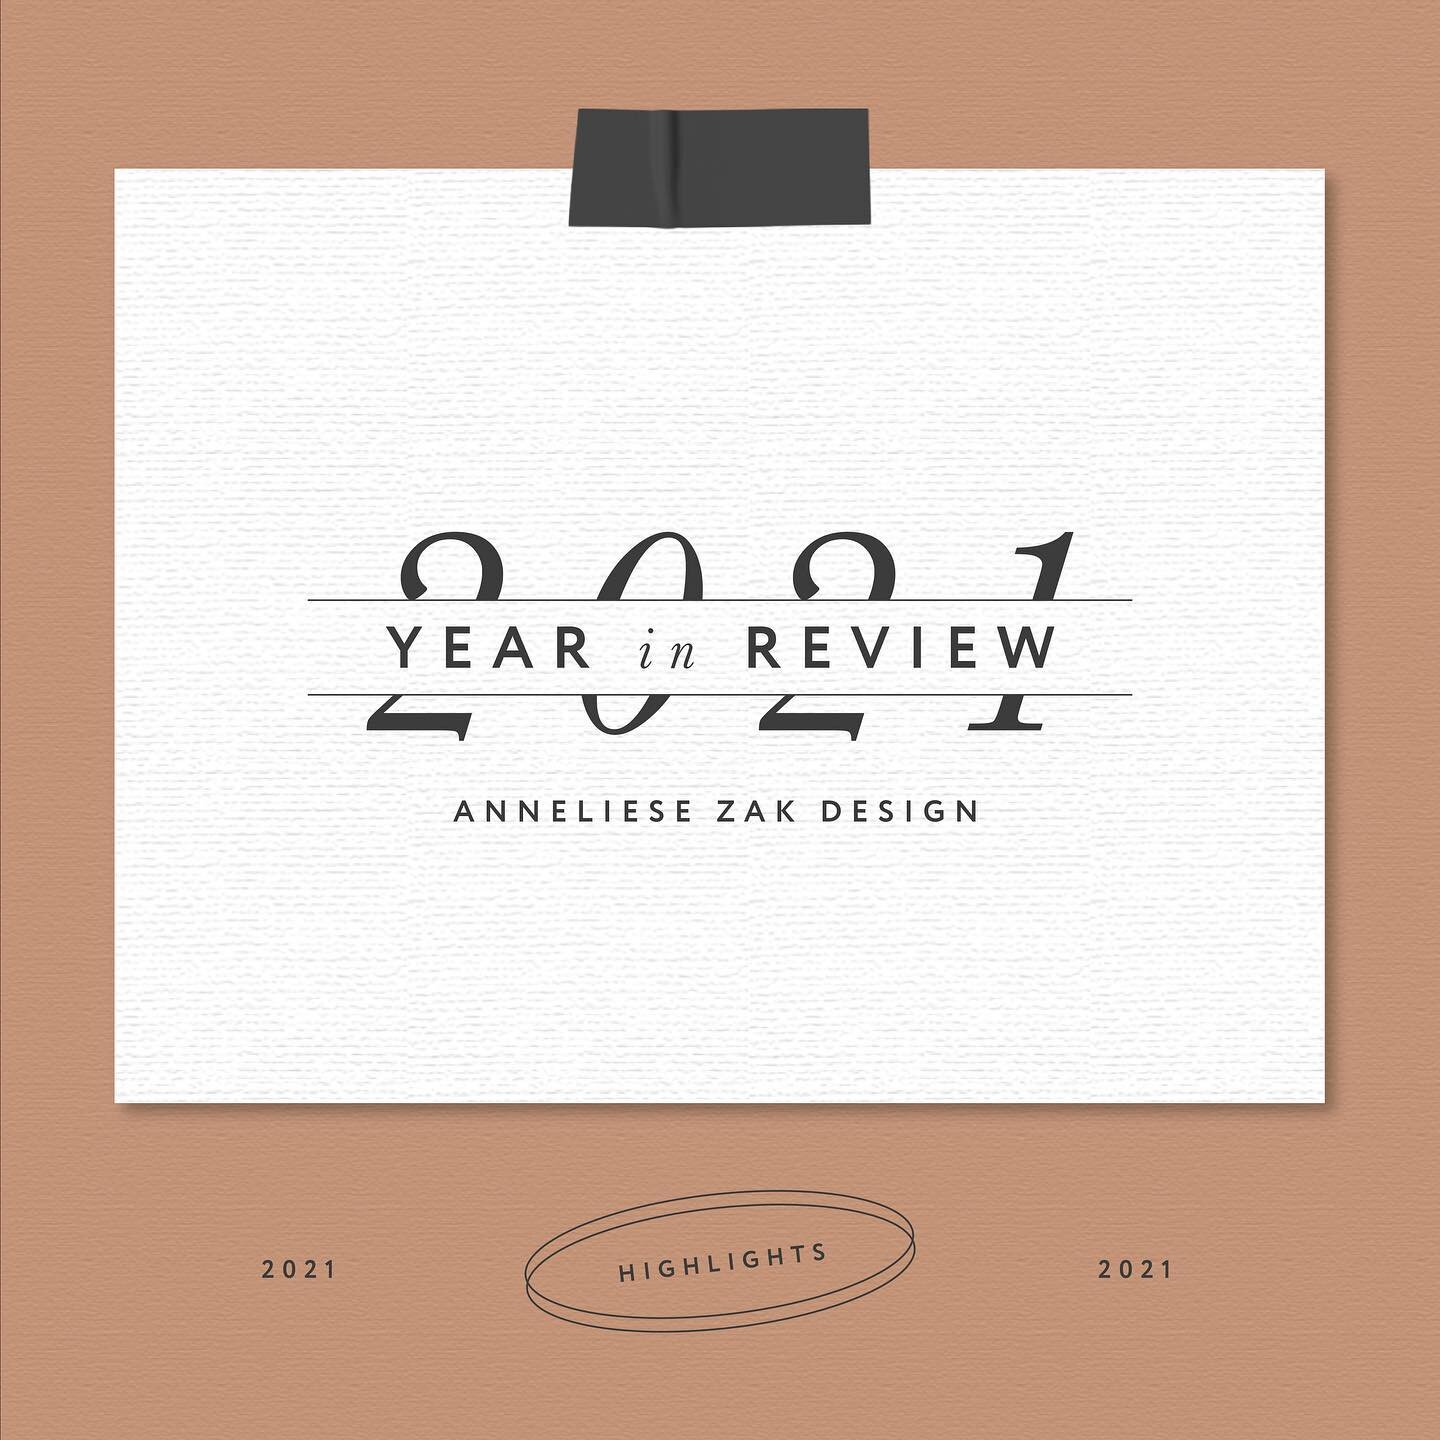 2021 year in review ✨ A showcase of some of my 2021 projects 🎞

A year full of firsts, new opportunities and lots of learning. 🥳

After transitioning to my business full time this past summer, I&rsquo;ve gotten to work with some amazing clients tha